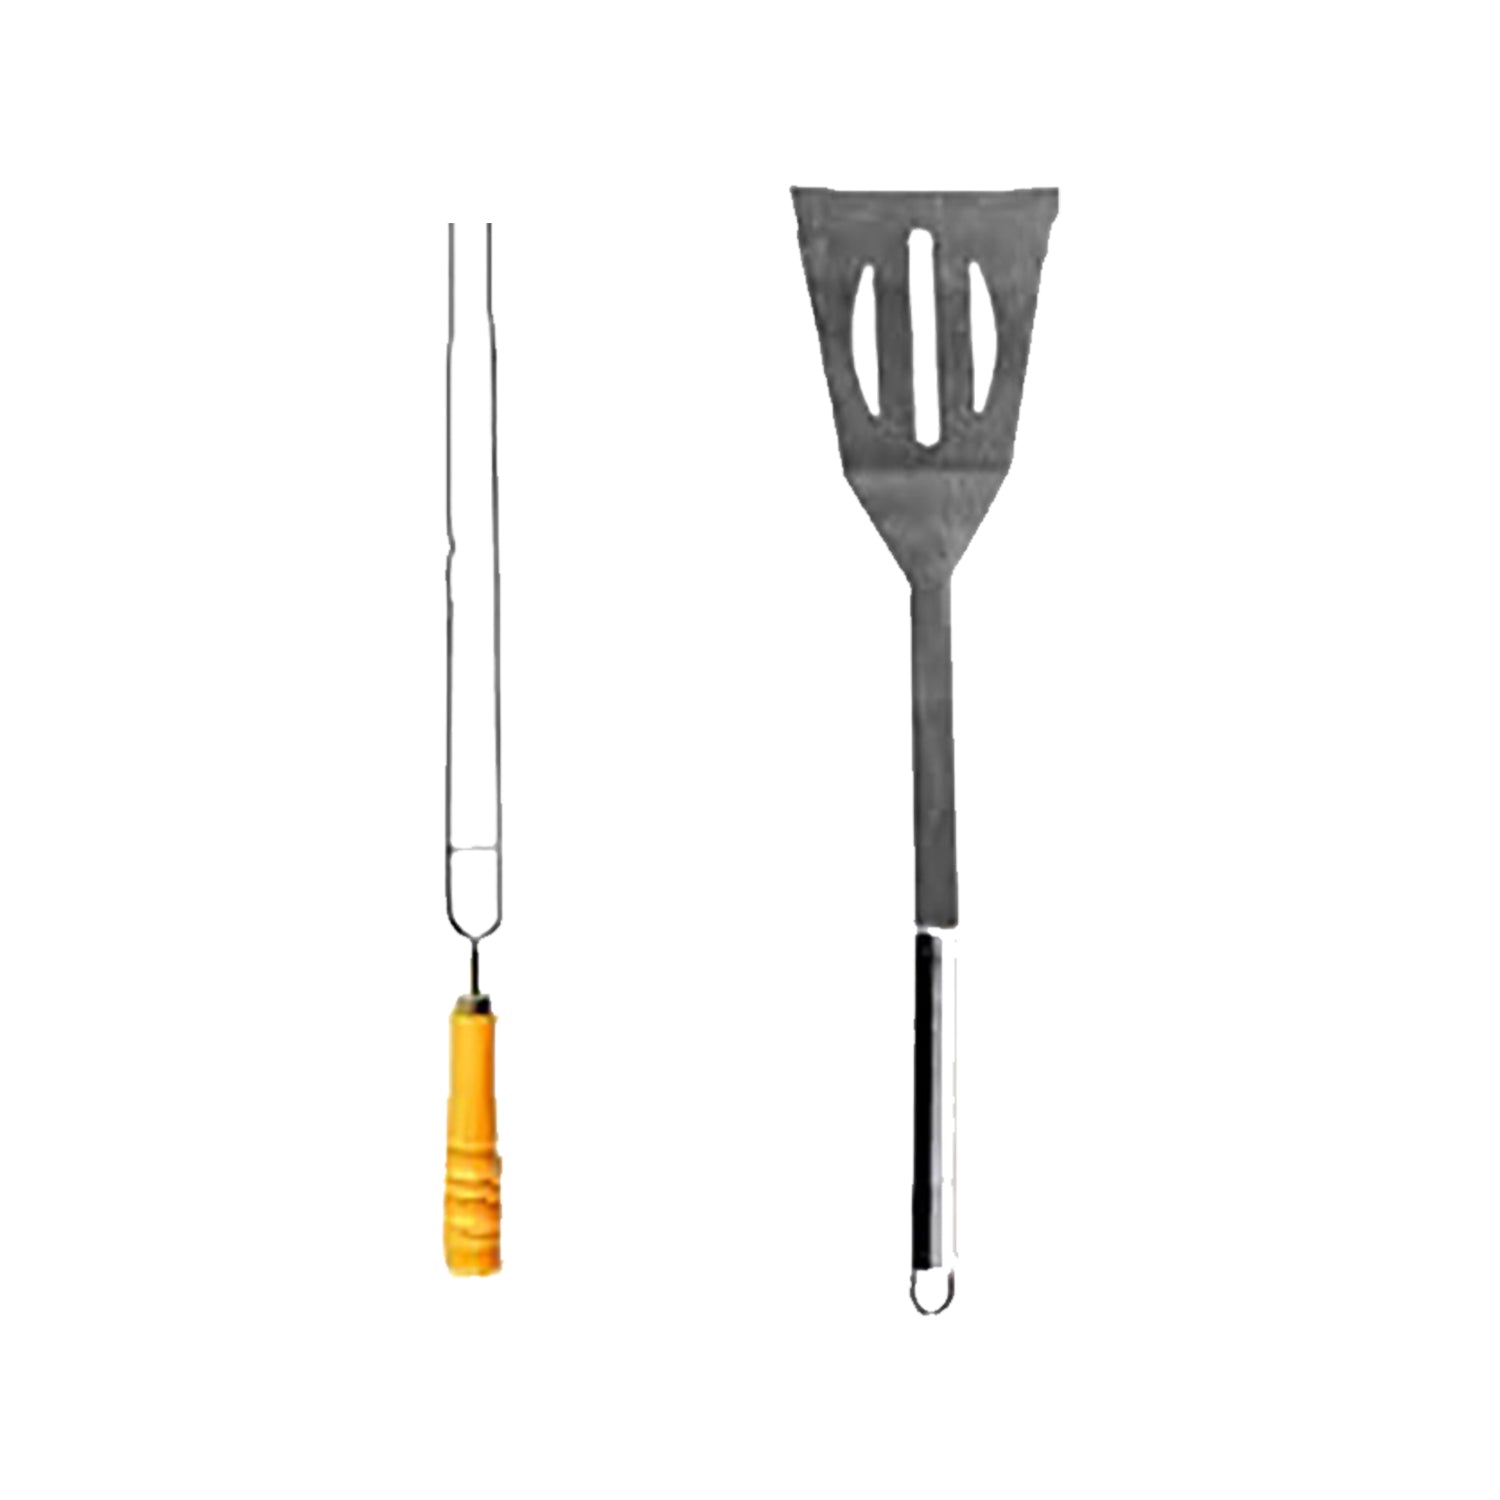 Barbeque Grill Cooking Kit, Set of 2 | Barbeque Accessories